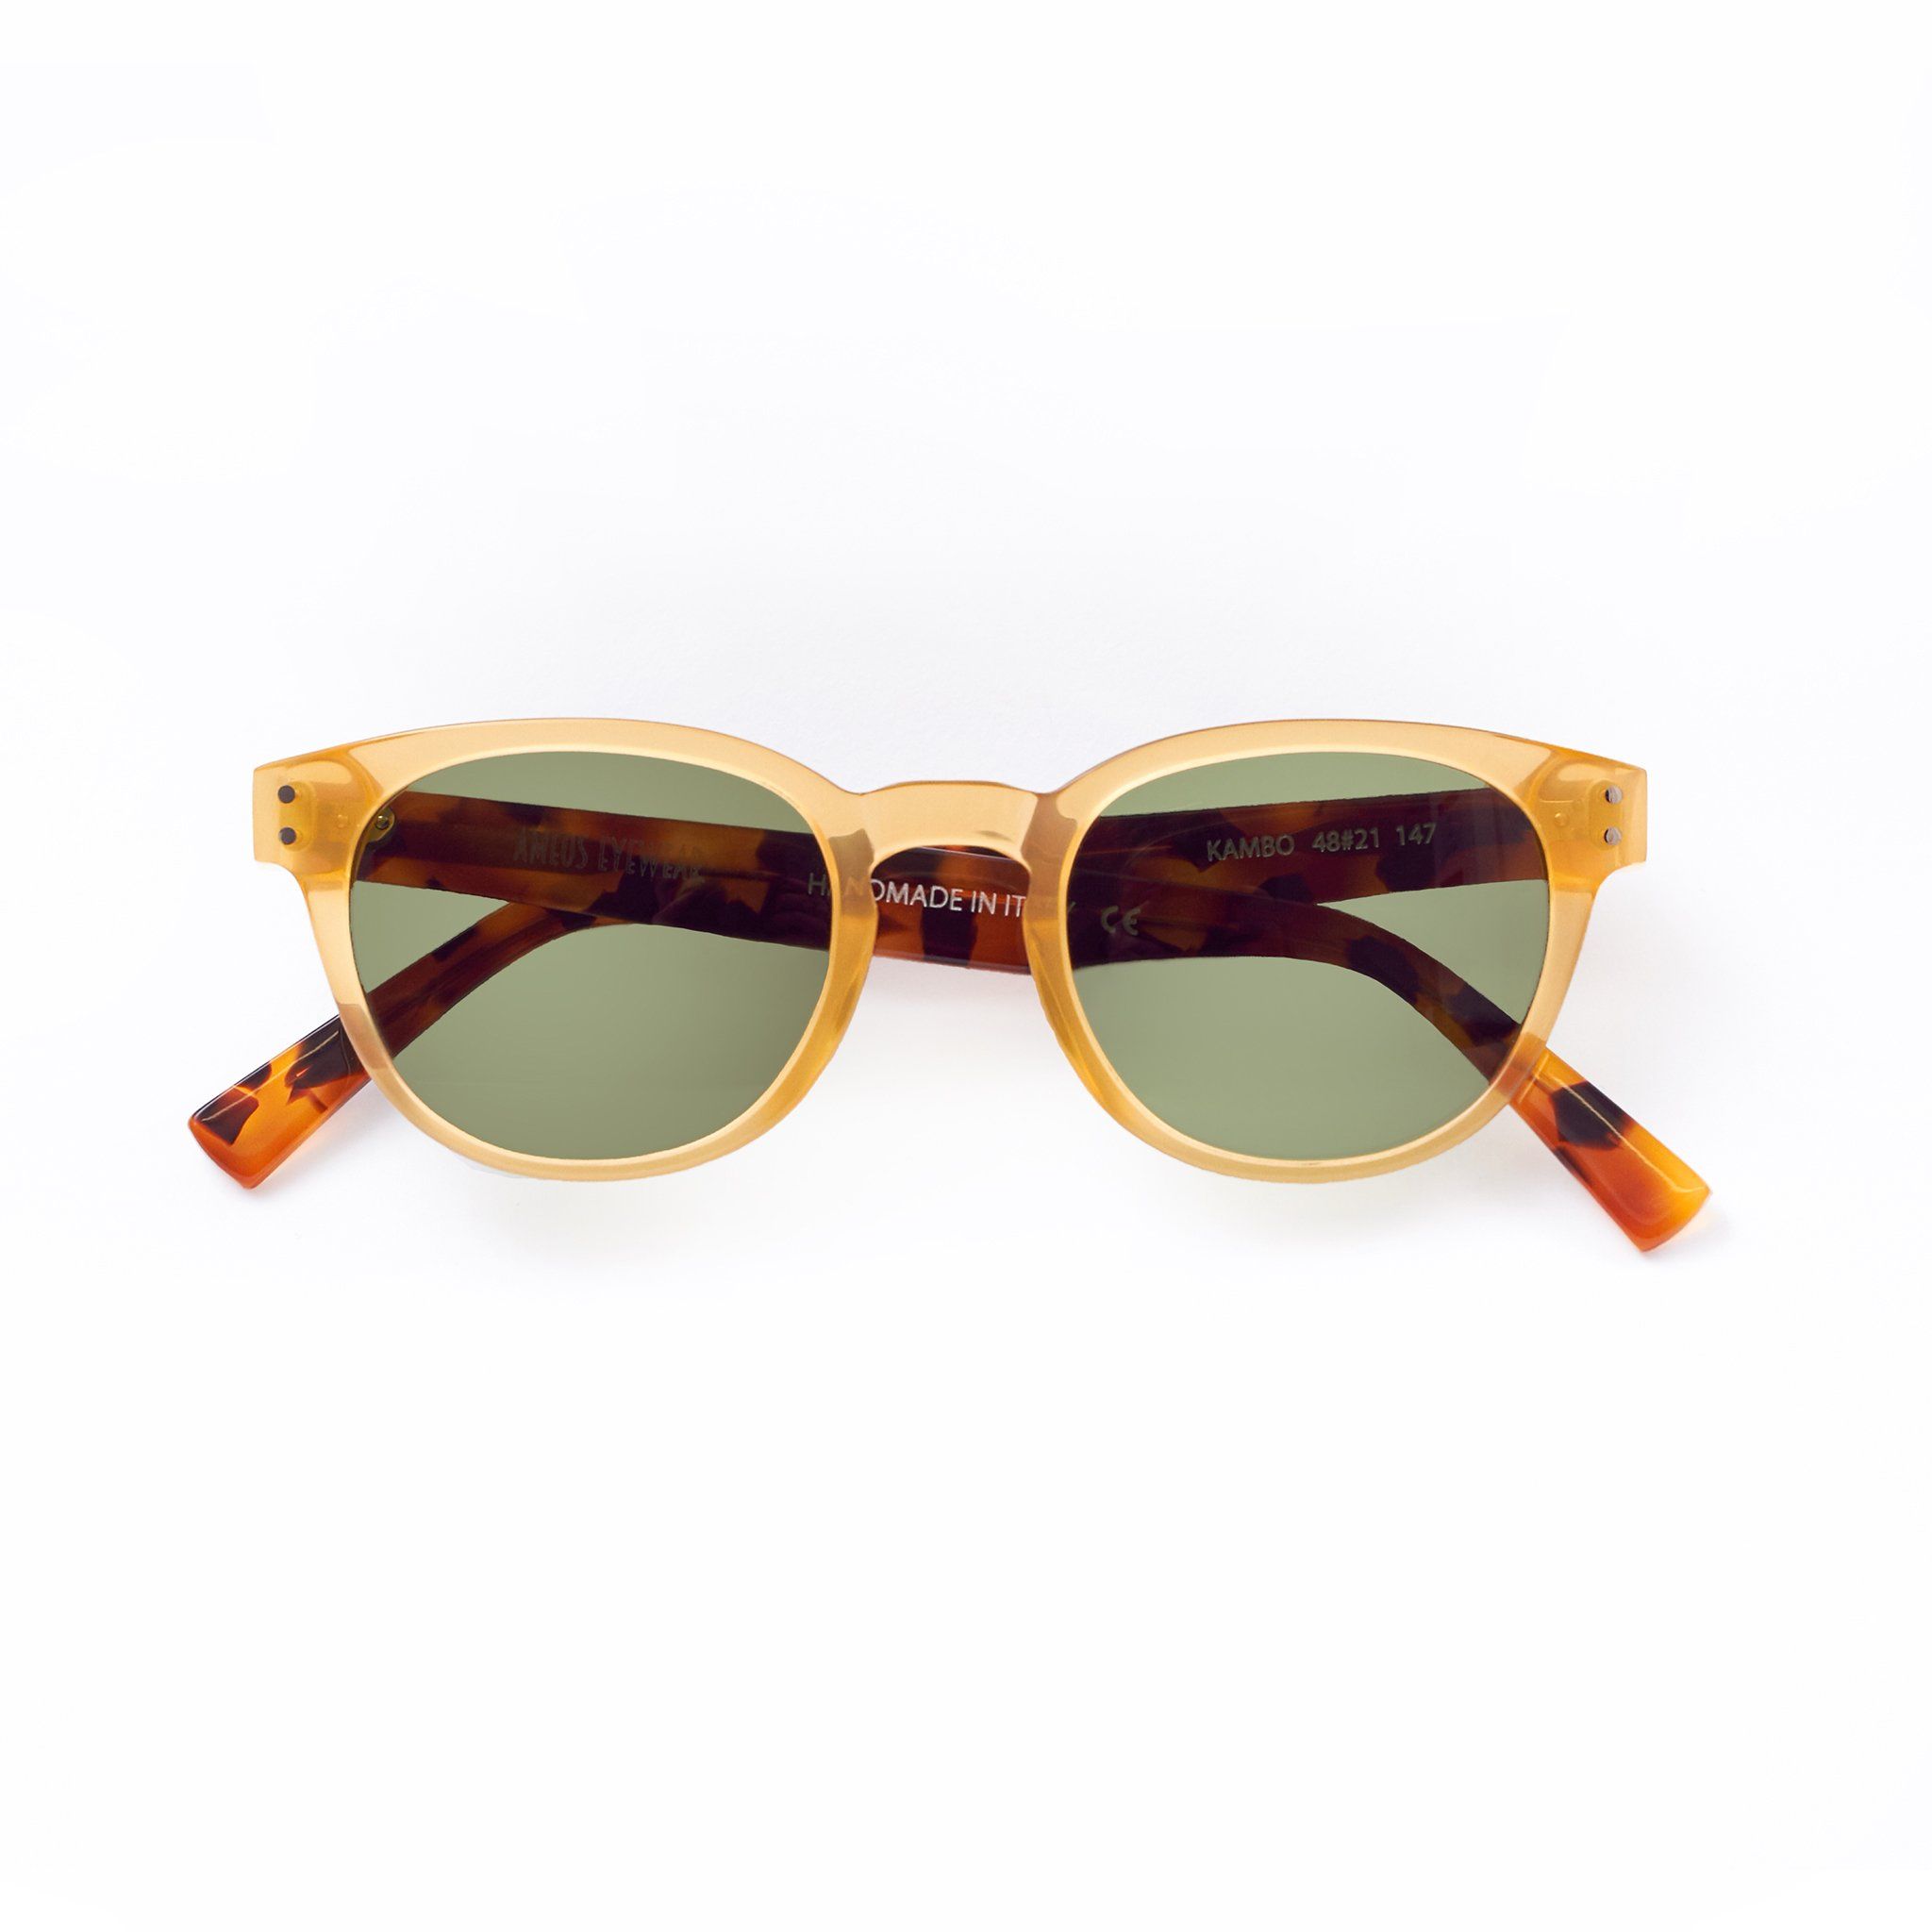 Honey and tortoise colored sunglasses with green lenses handmade in italy